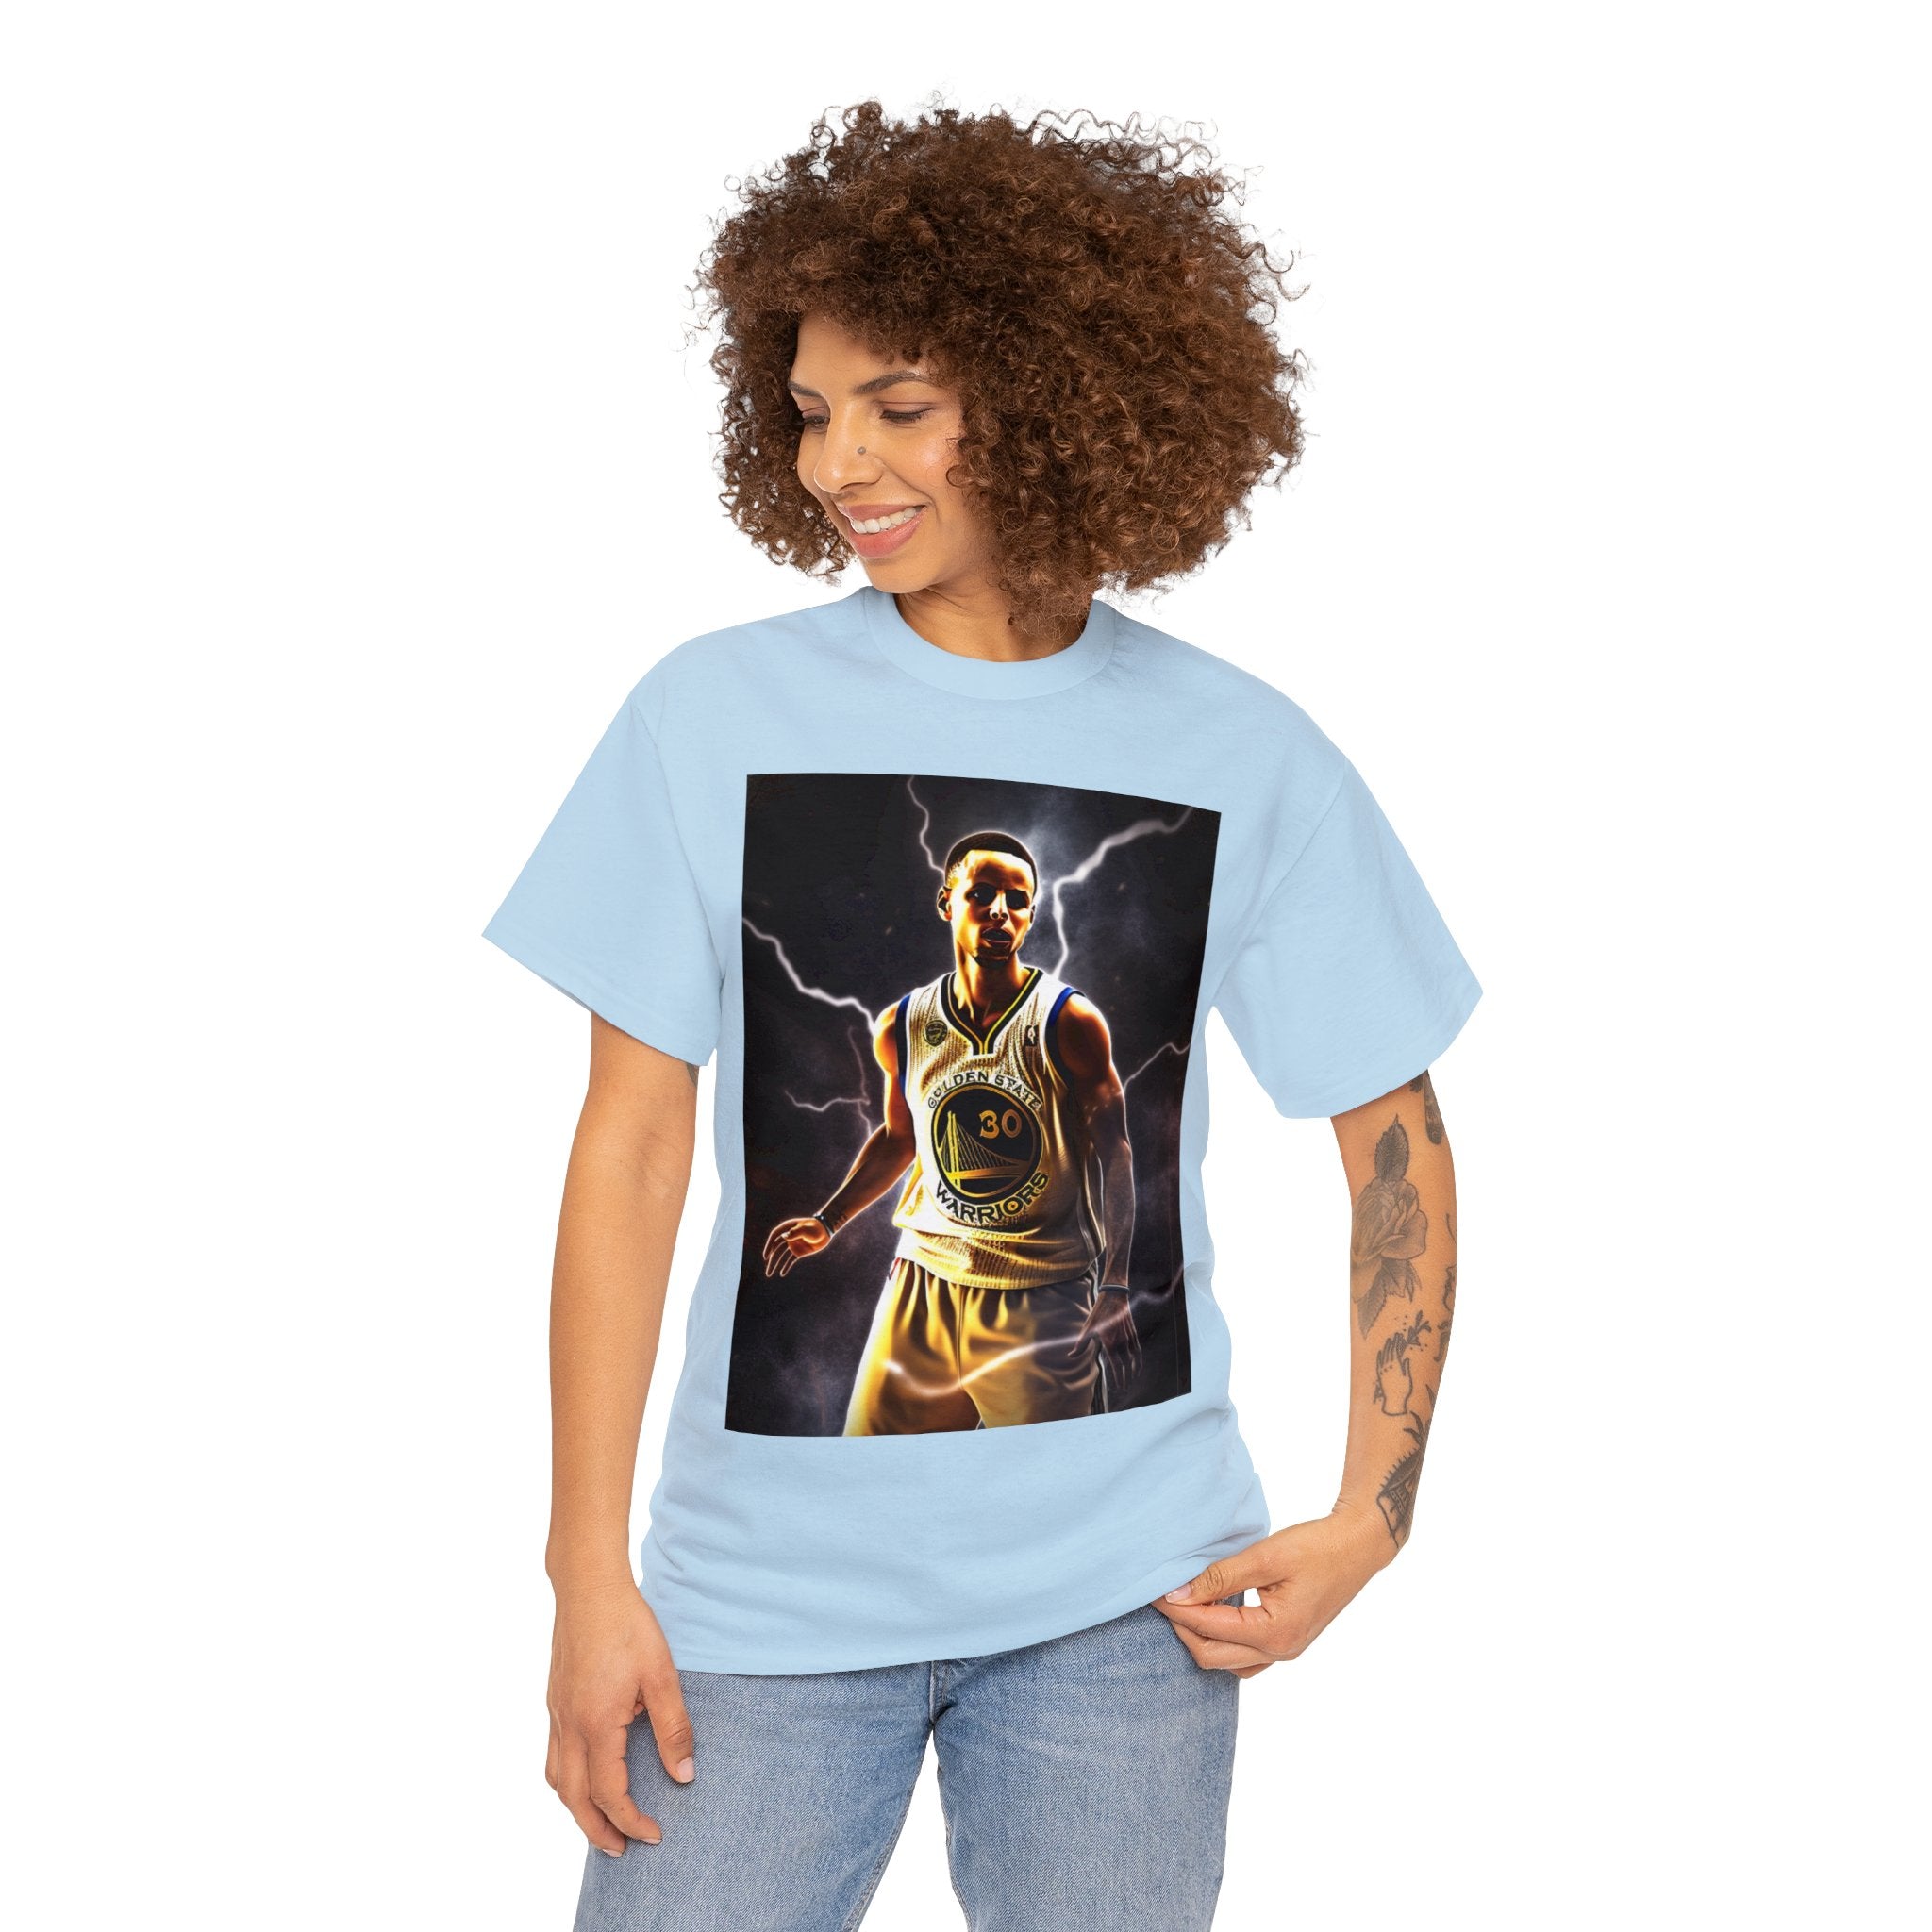 "Beyond the Arc: 3-Point Lightning Strike" Unisex Heavy Cotton Tee - A Tribute to Basketball's Ultimate Sharpshooter, Inspired by the Legendary Skills of The Chef Himself, S.C.